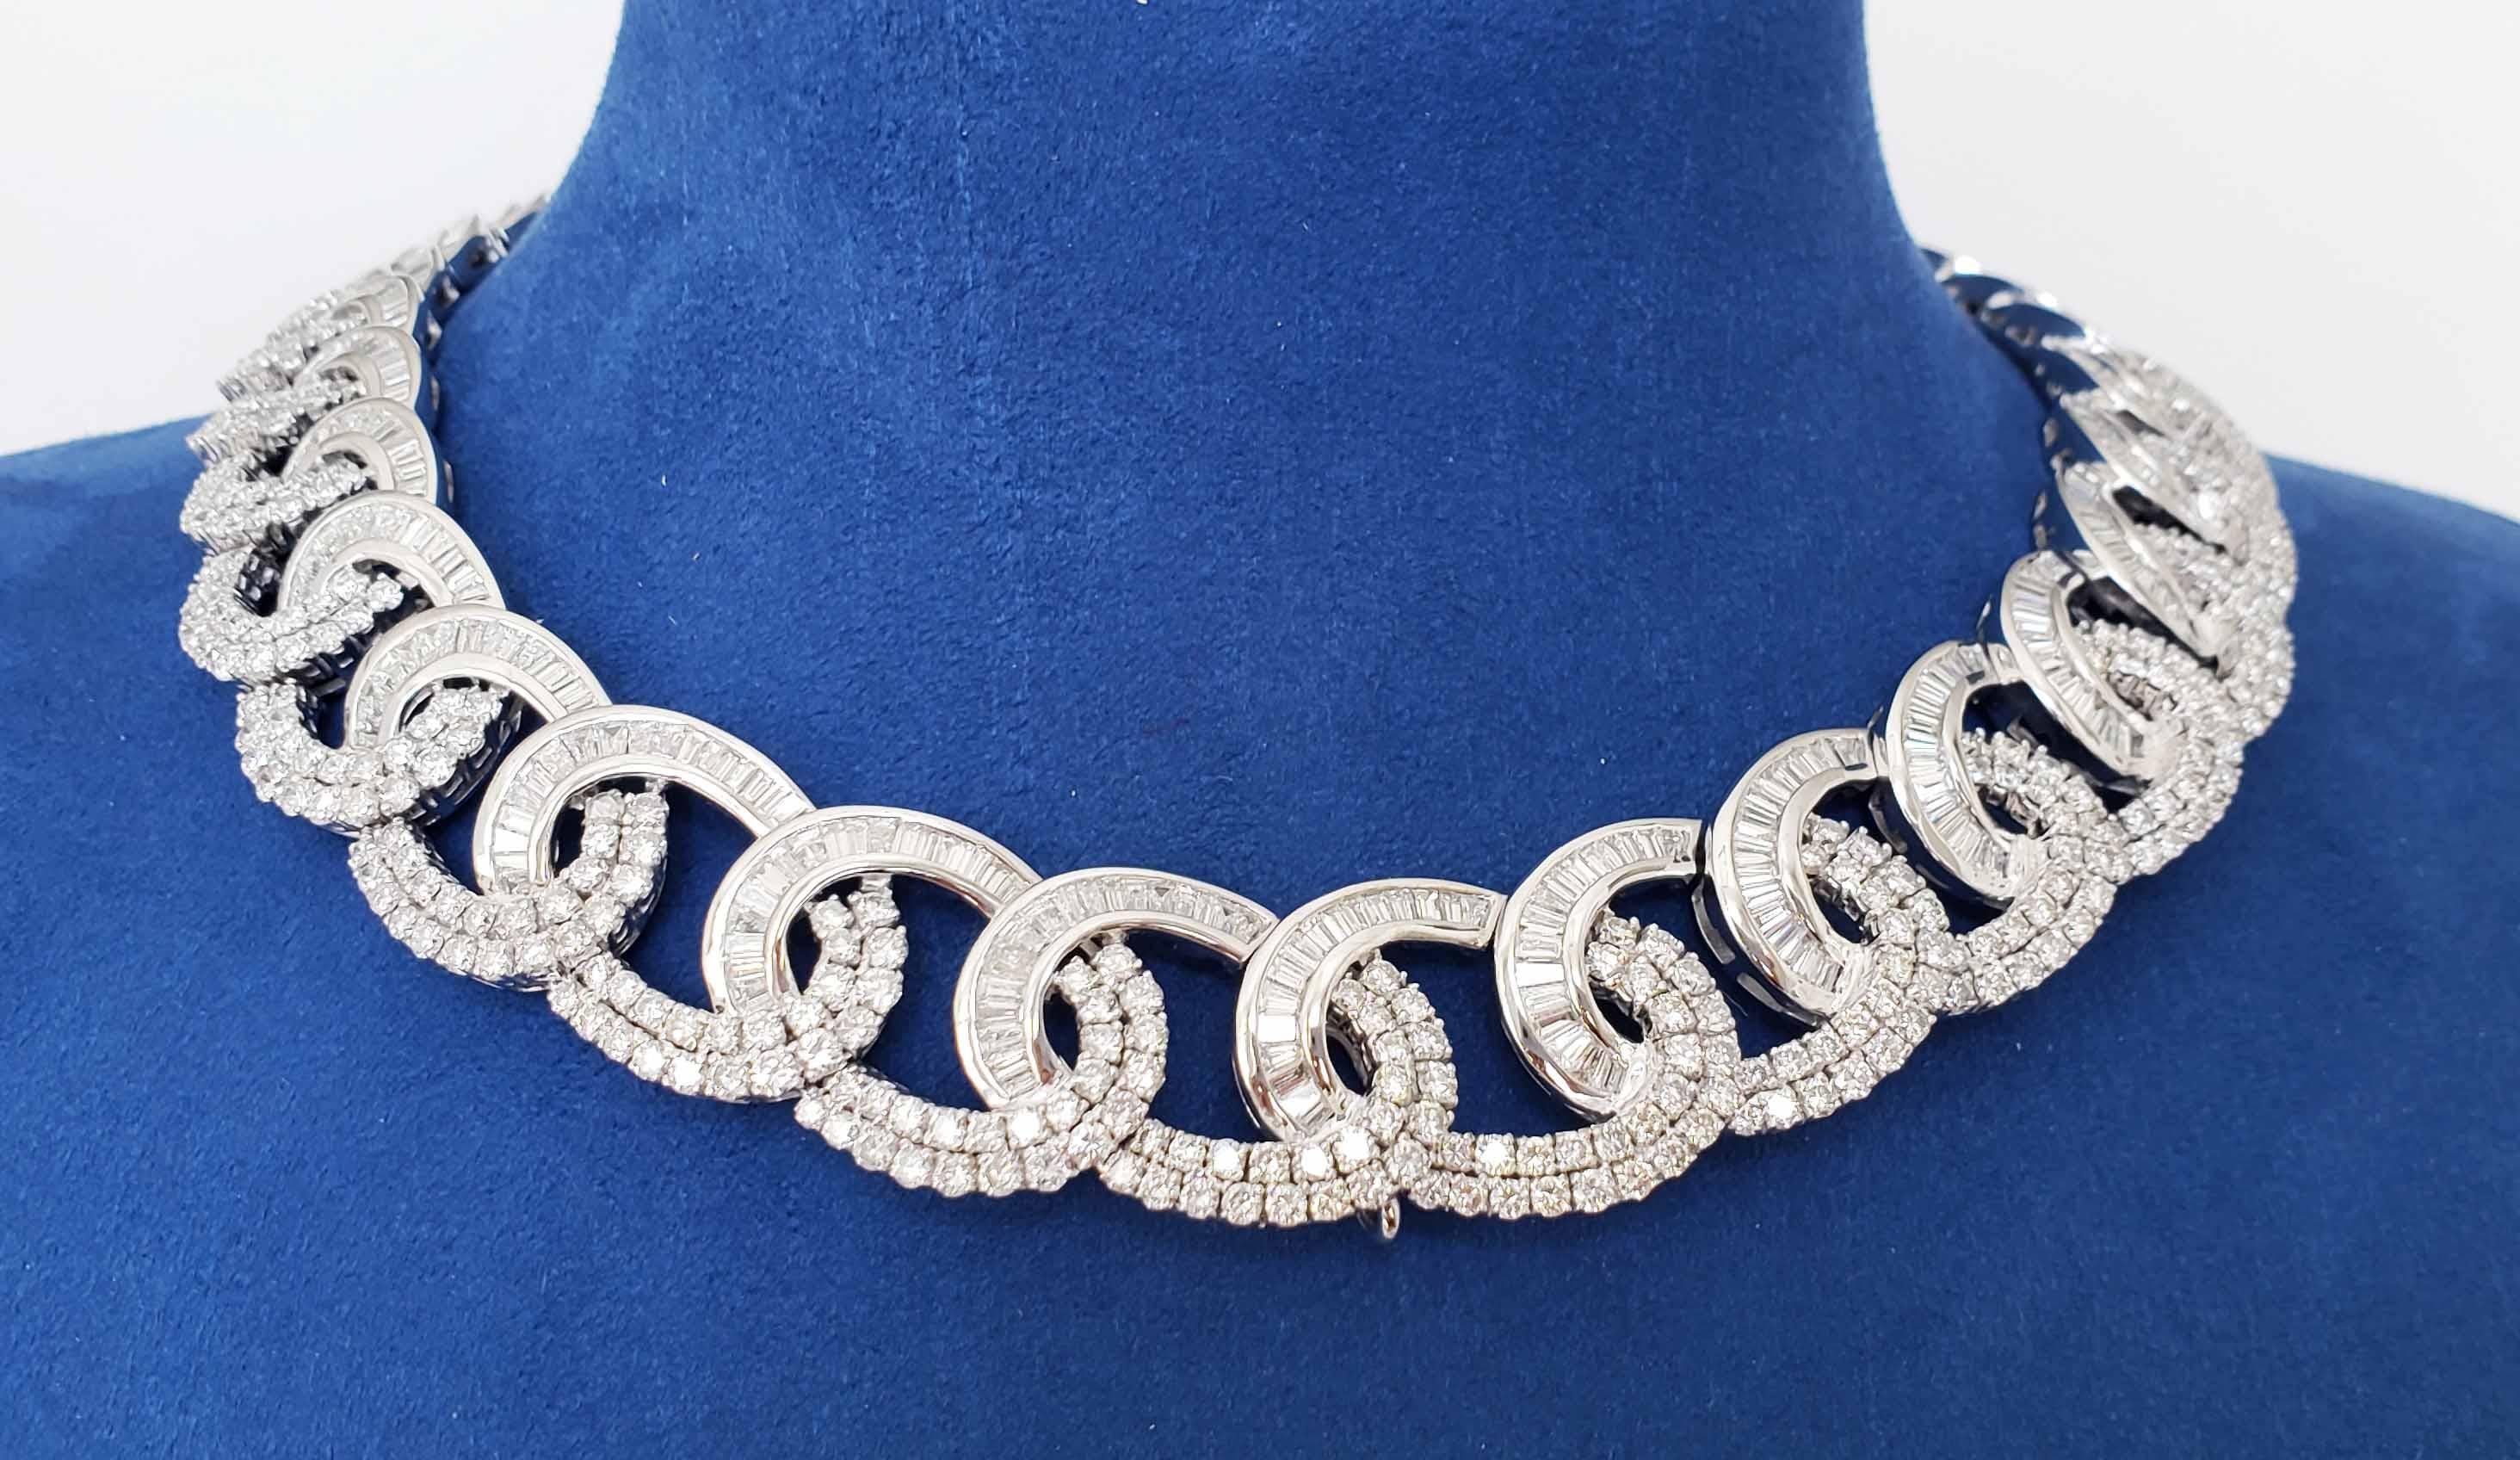 The ultimate wearable luxury, this linkage necklace in 18 karats white gold with 54.50 carats in white diamonds. The loops are enhanced with deeper baguette and emerald cut diamonds to percept the continues movement in this spectacular Cuban chocker